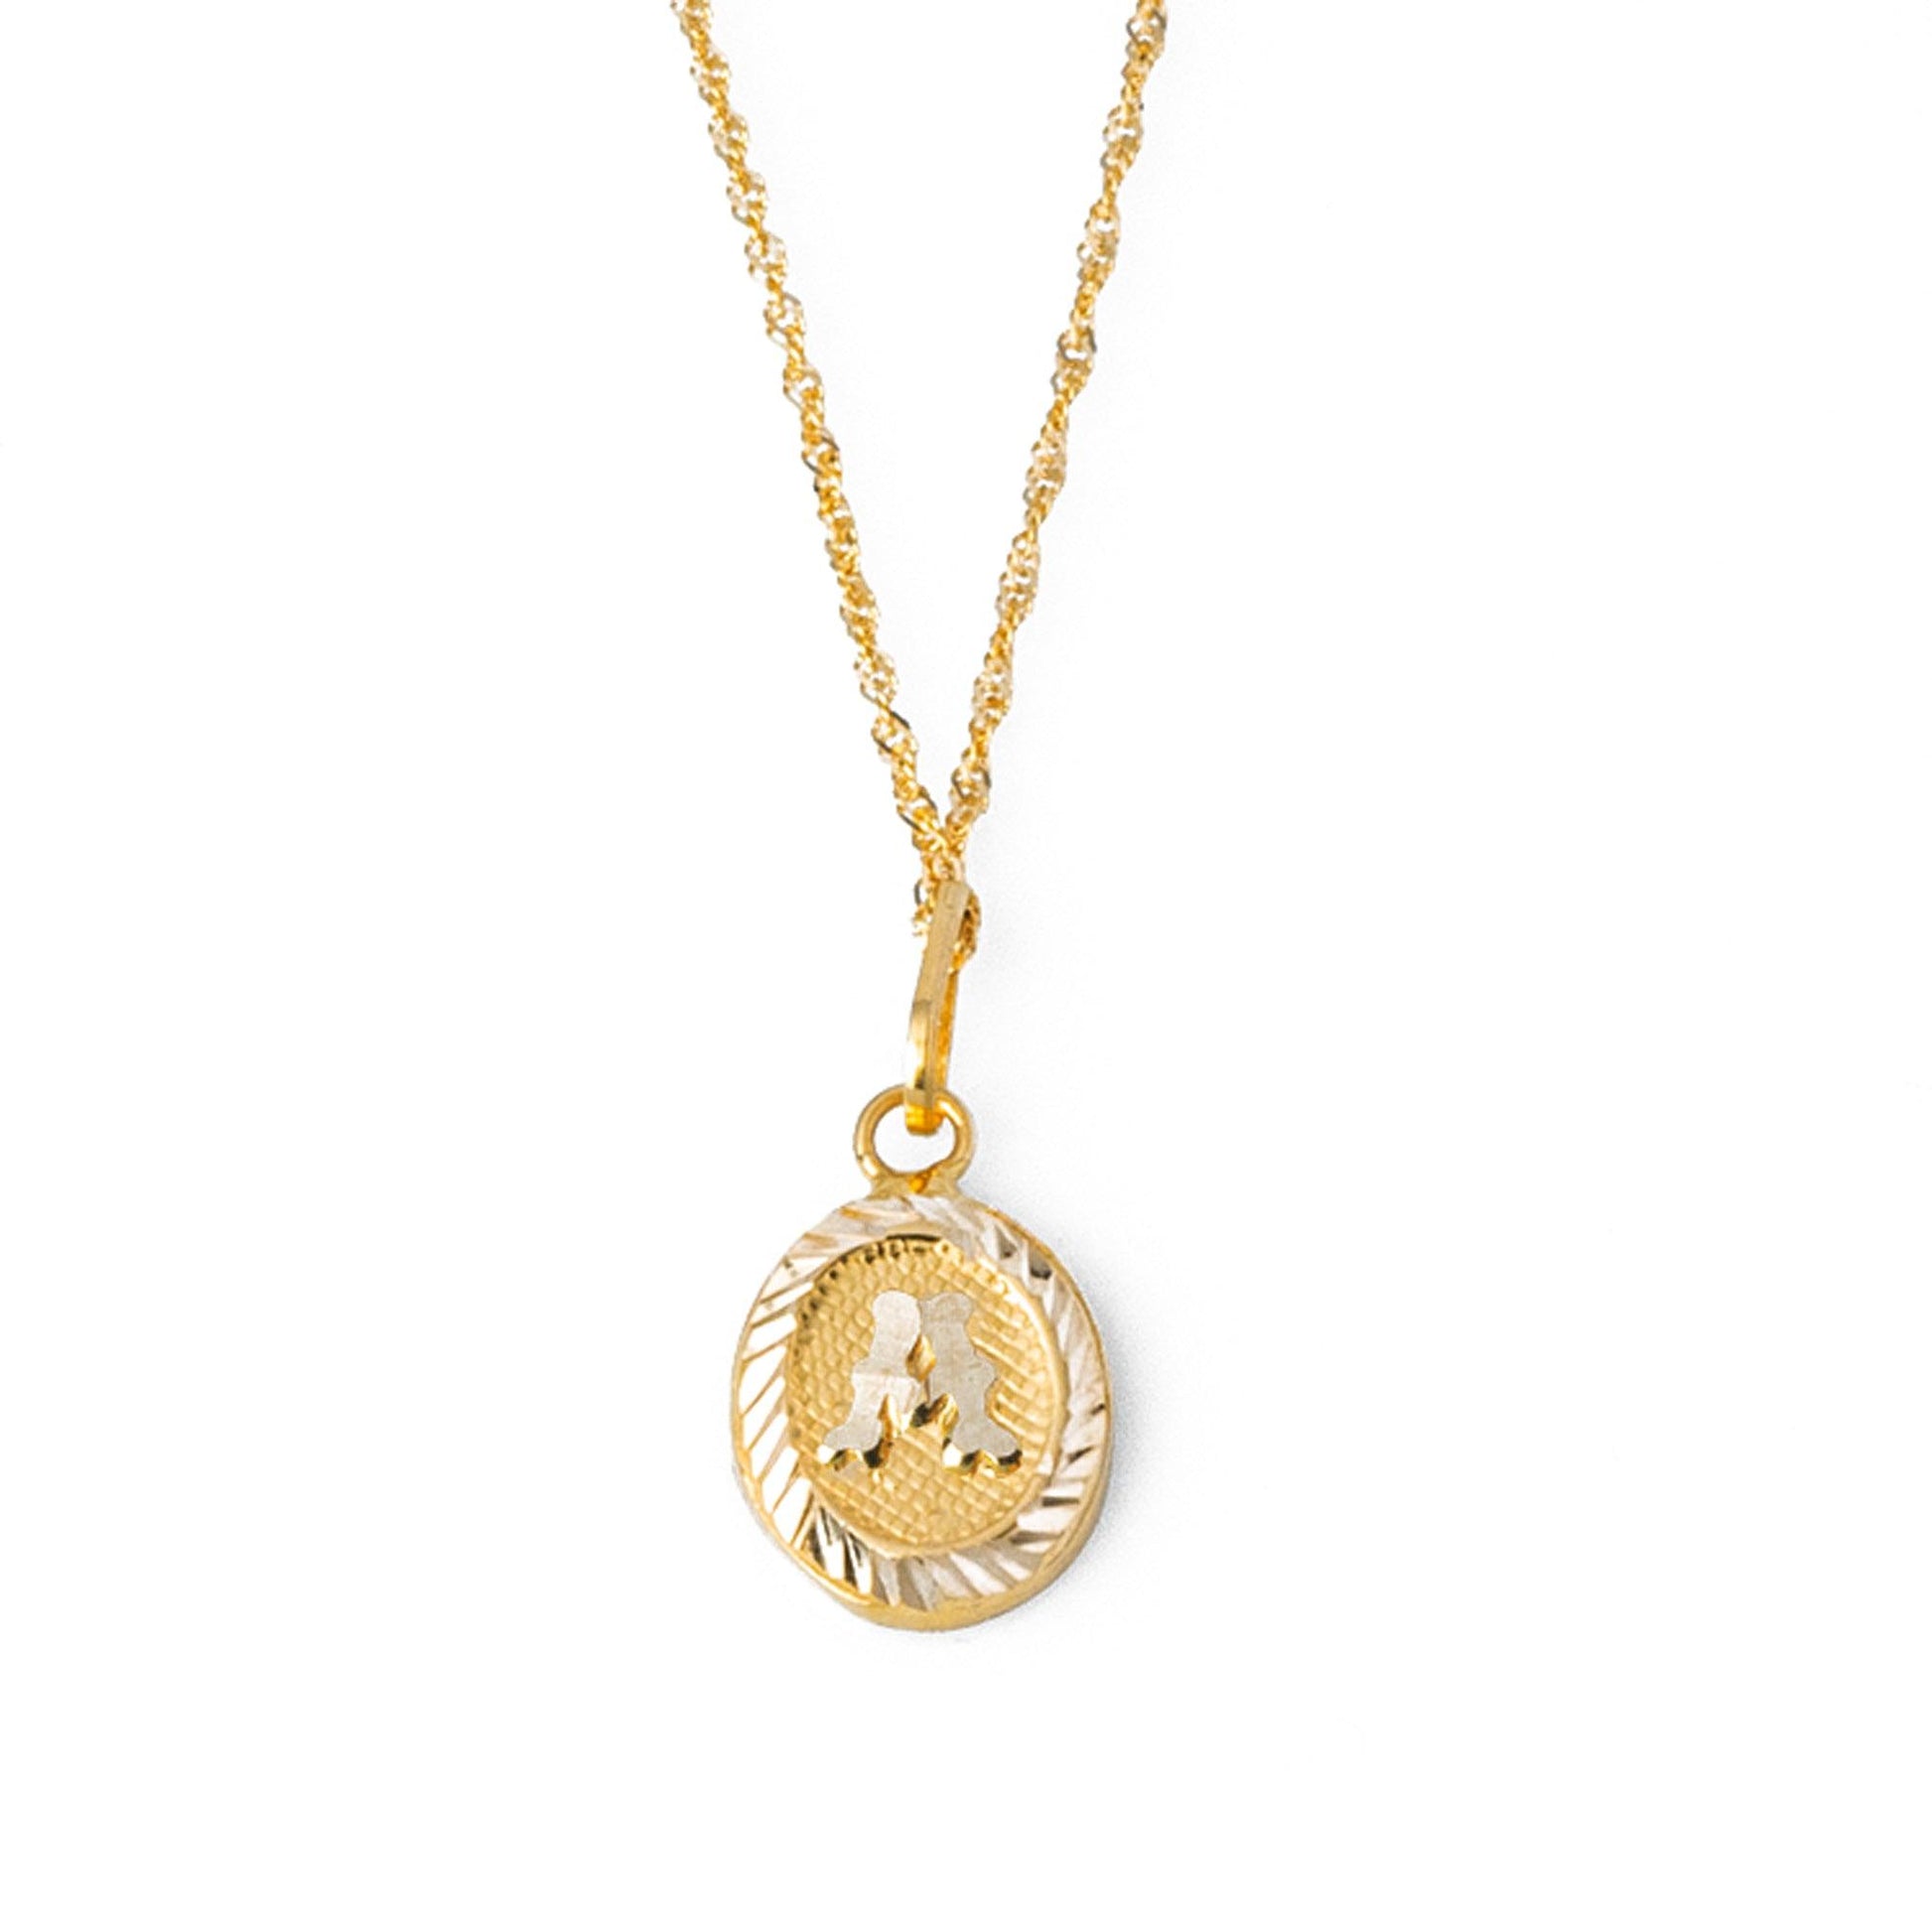 'A' Initial Pendant 22ct Gold P-7550 - Minar Jewellers